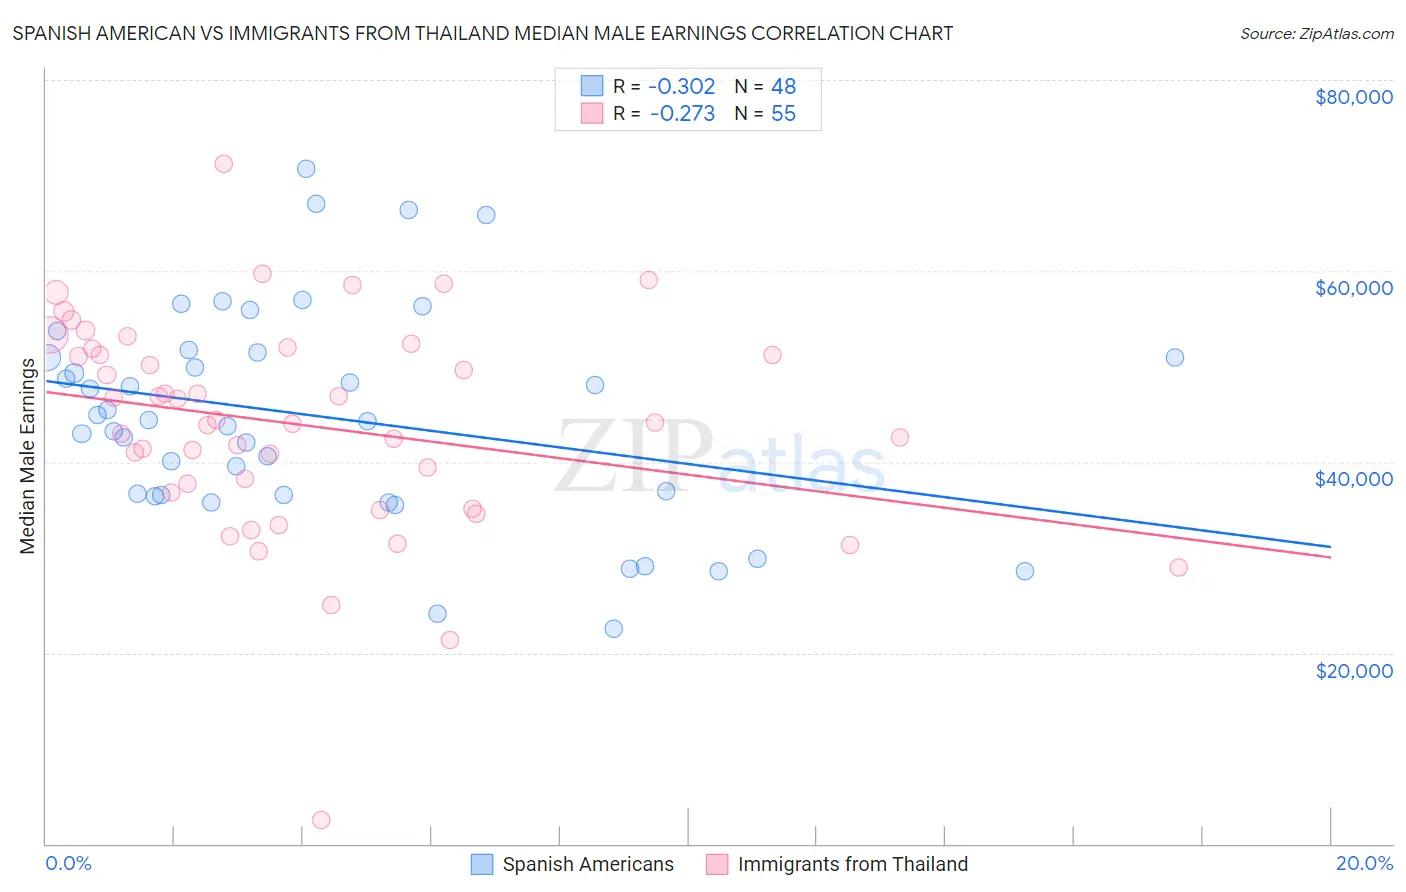 Spanish American vs Immigrants from Thailand Median Male Earnings